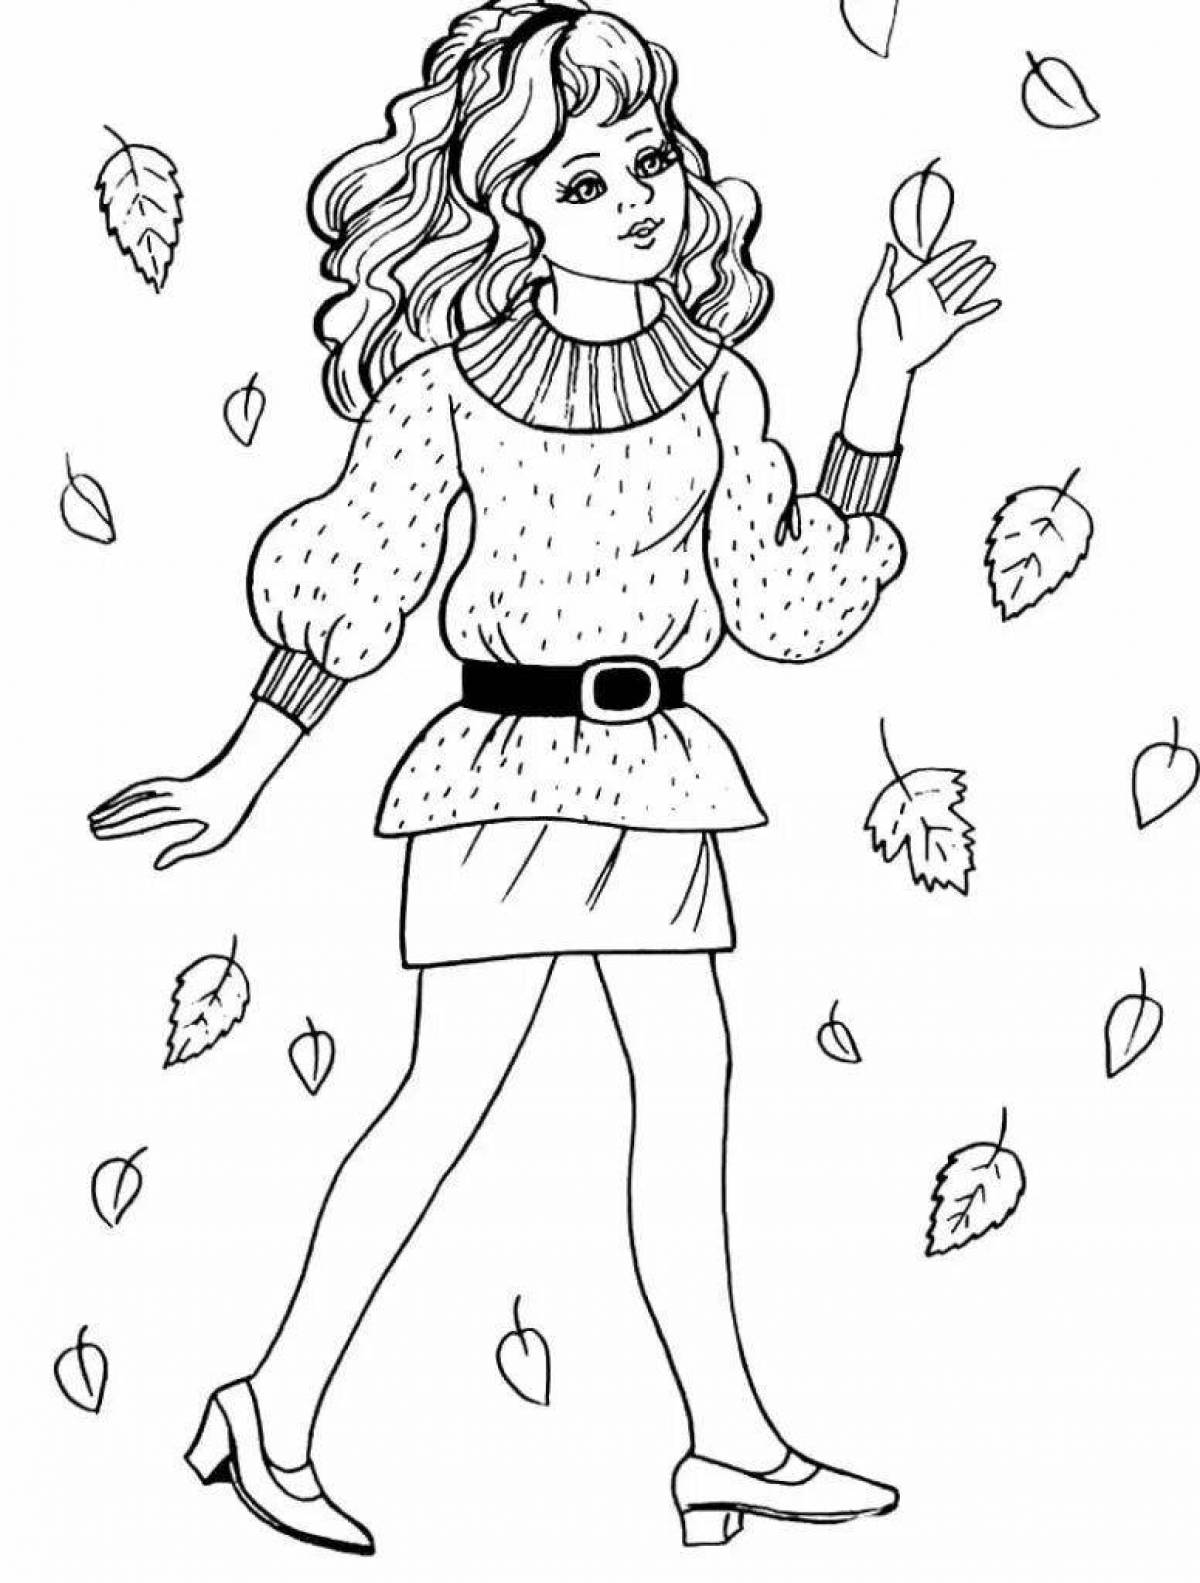 Color-frenzy coloring page for 12 year old girls